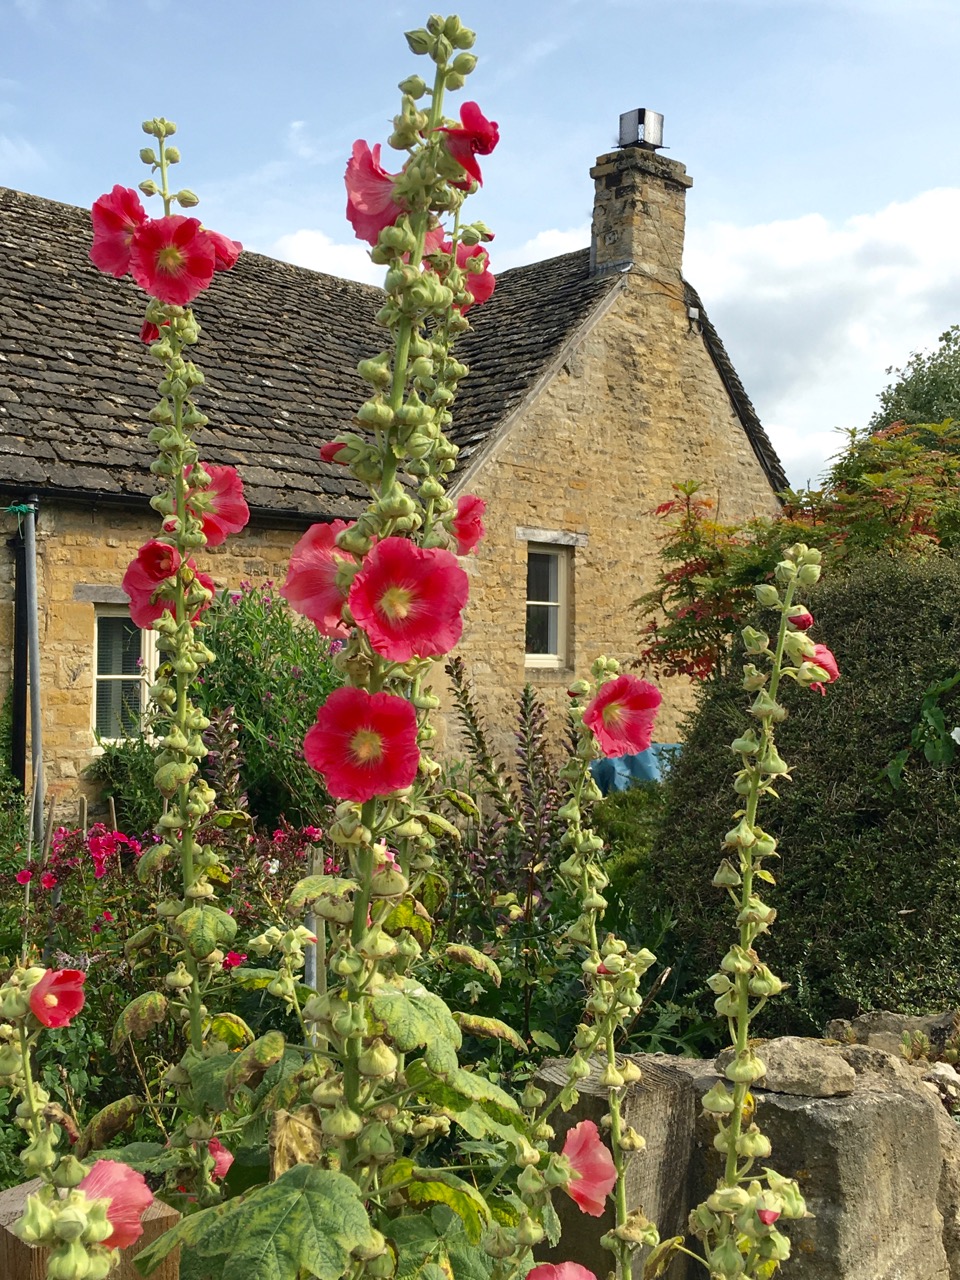 Hollyhocks in front of a cottage built from Cotswold stone ©Laurel Kallenbach